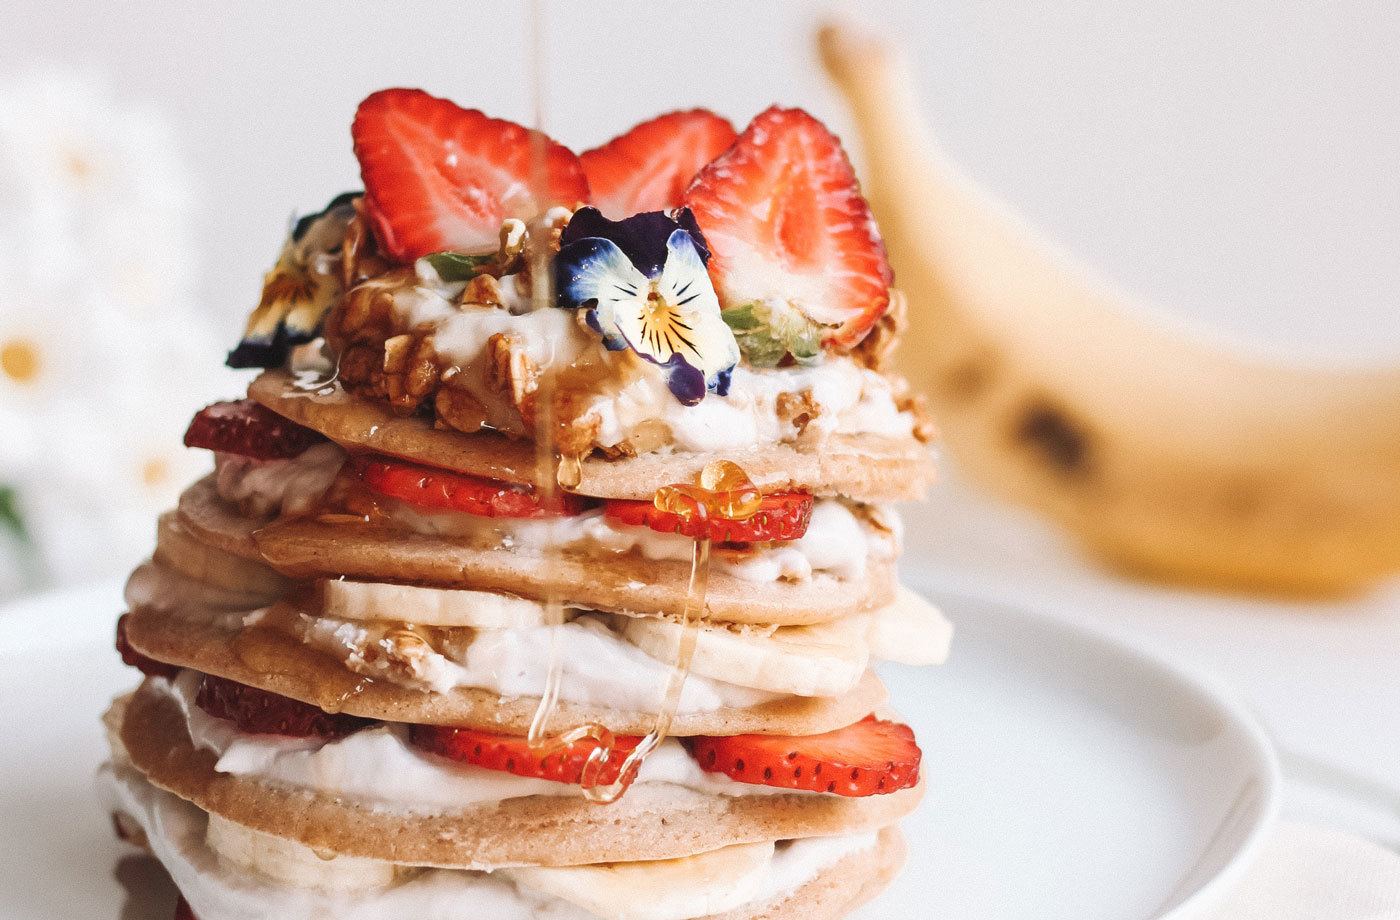 Celebrate National Pancake Day with these 9 healthy recipes